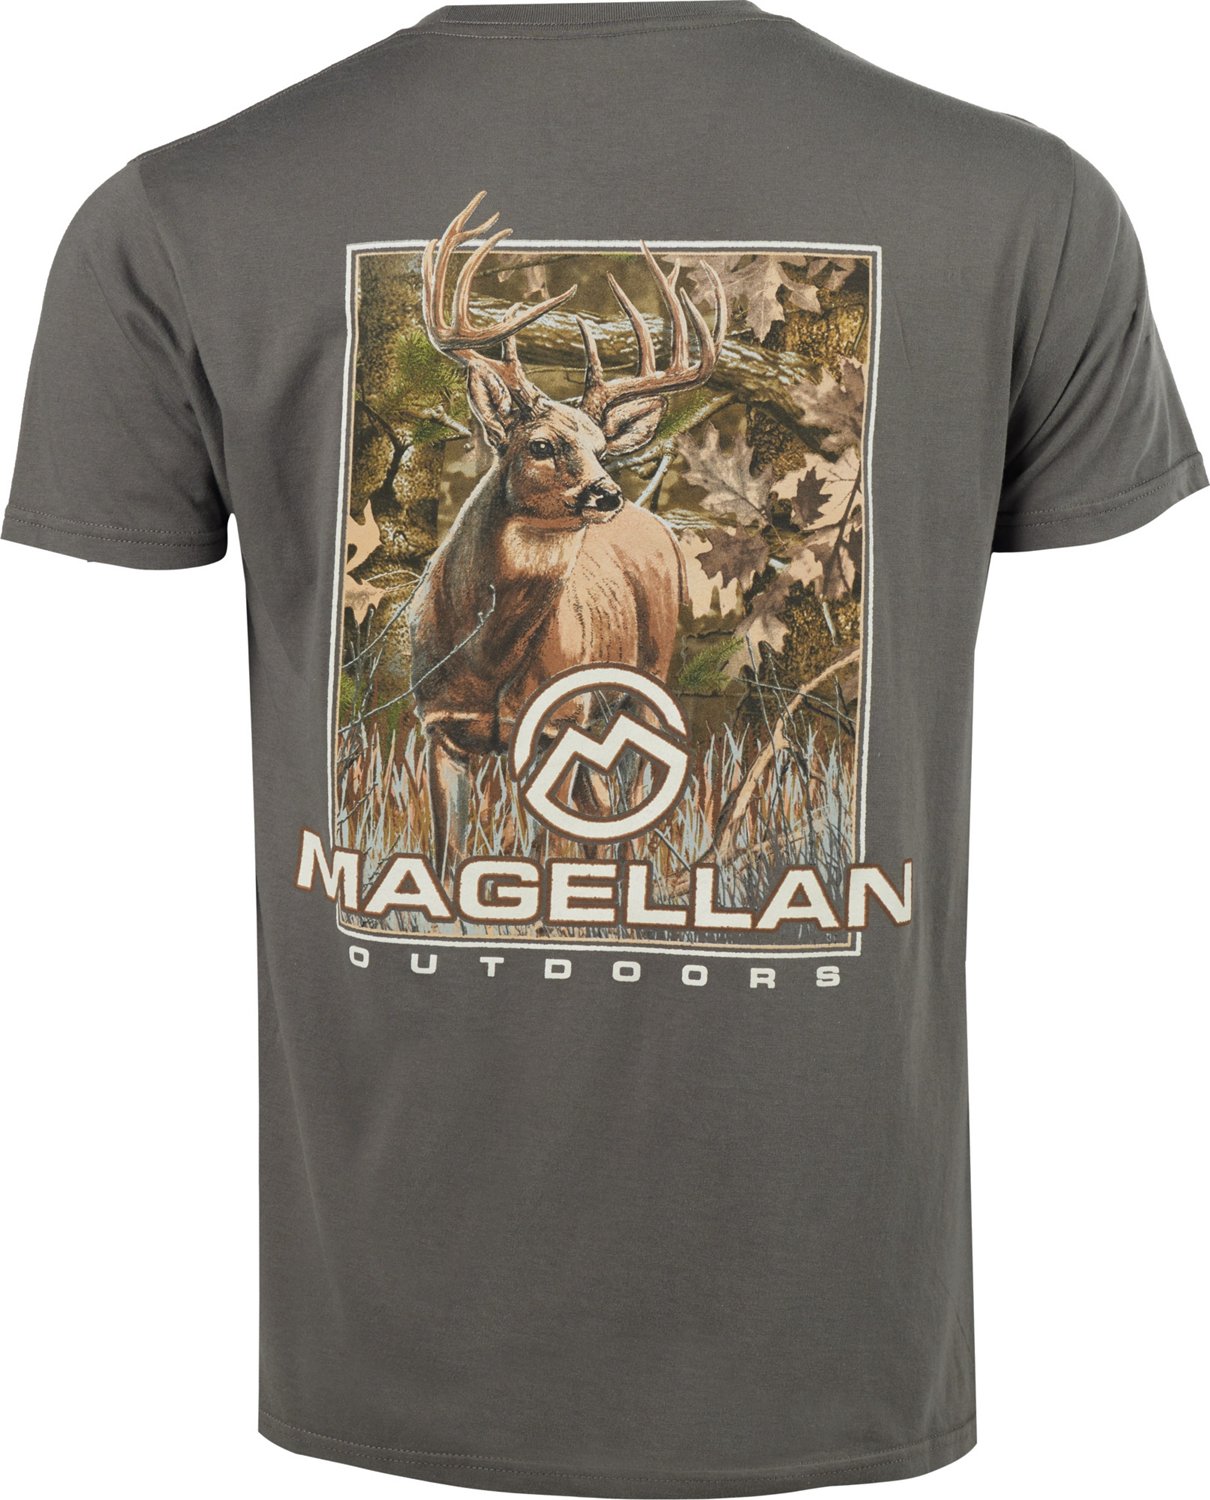 Magellan Boys Tops, Shirts & T-Shirts for Boys for sale